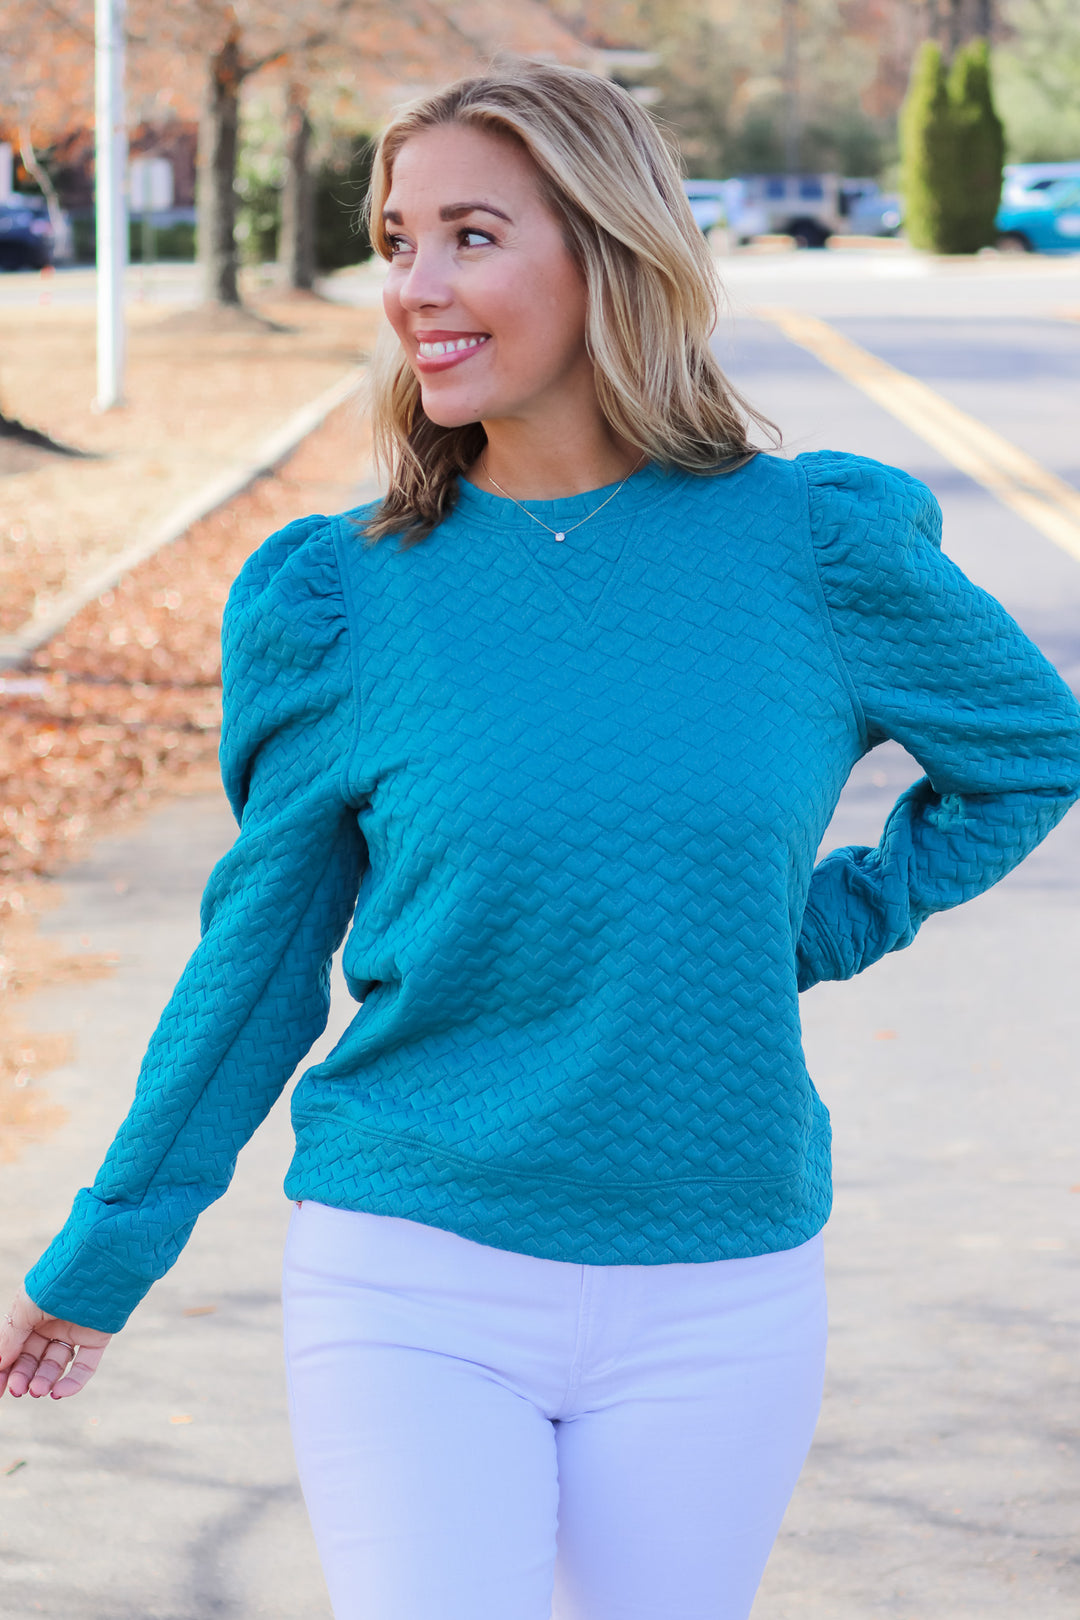 A blonde woman standing outside wearing a teal quilted puff sleeve sweatshirt and white jeans.